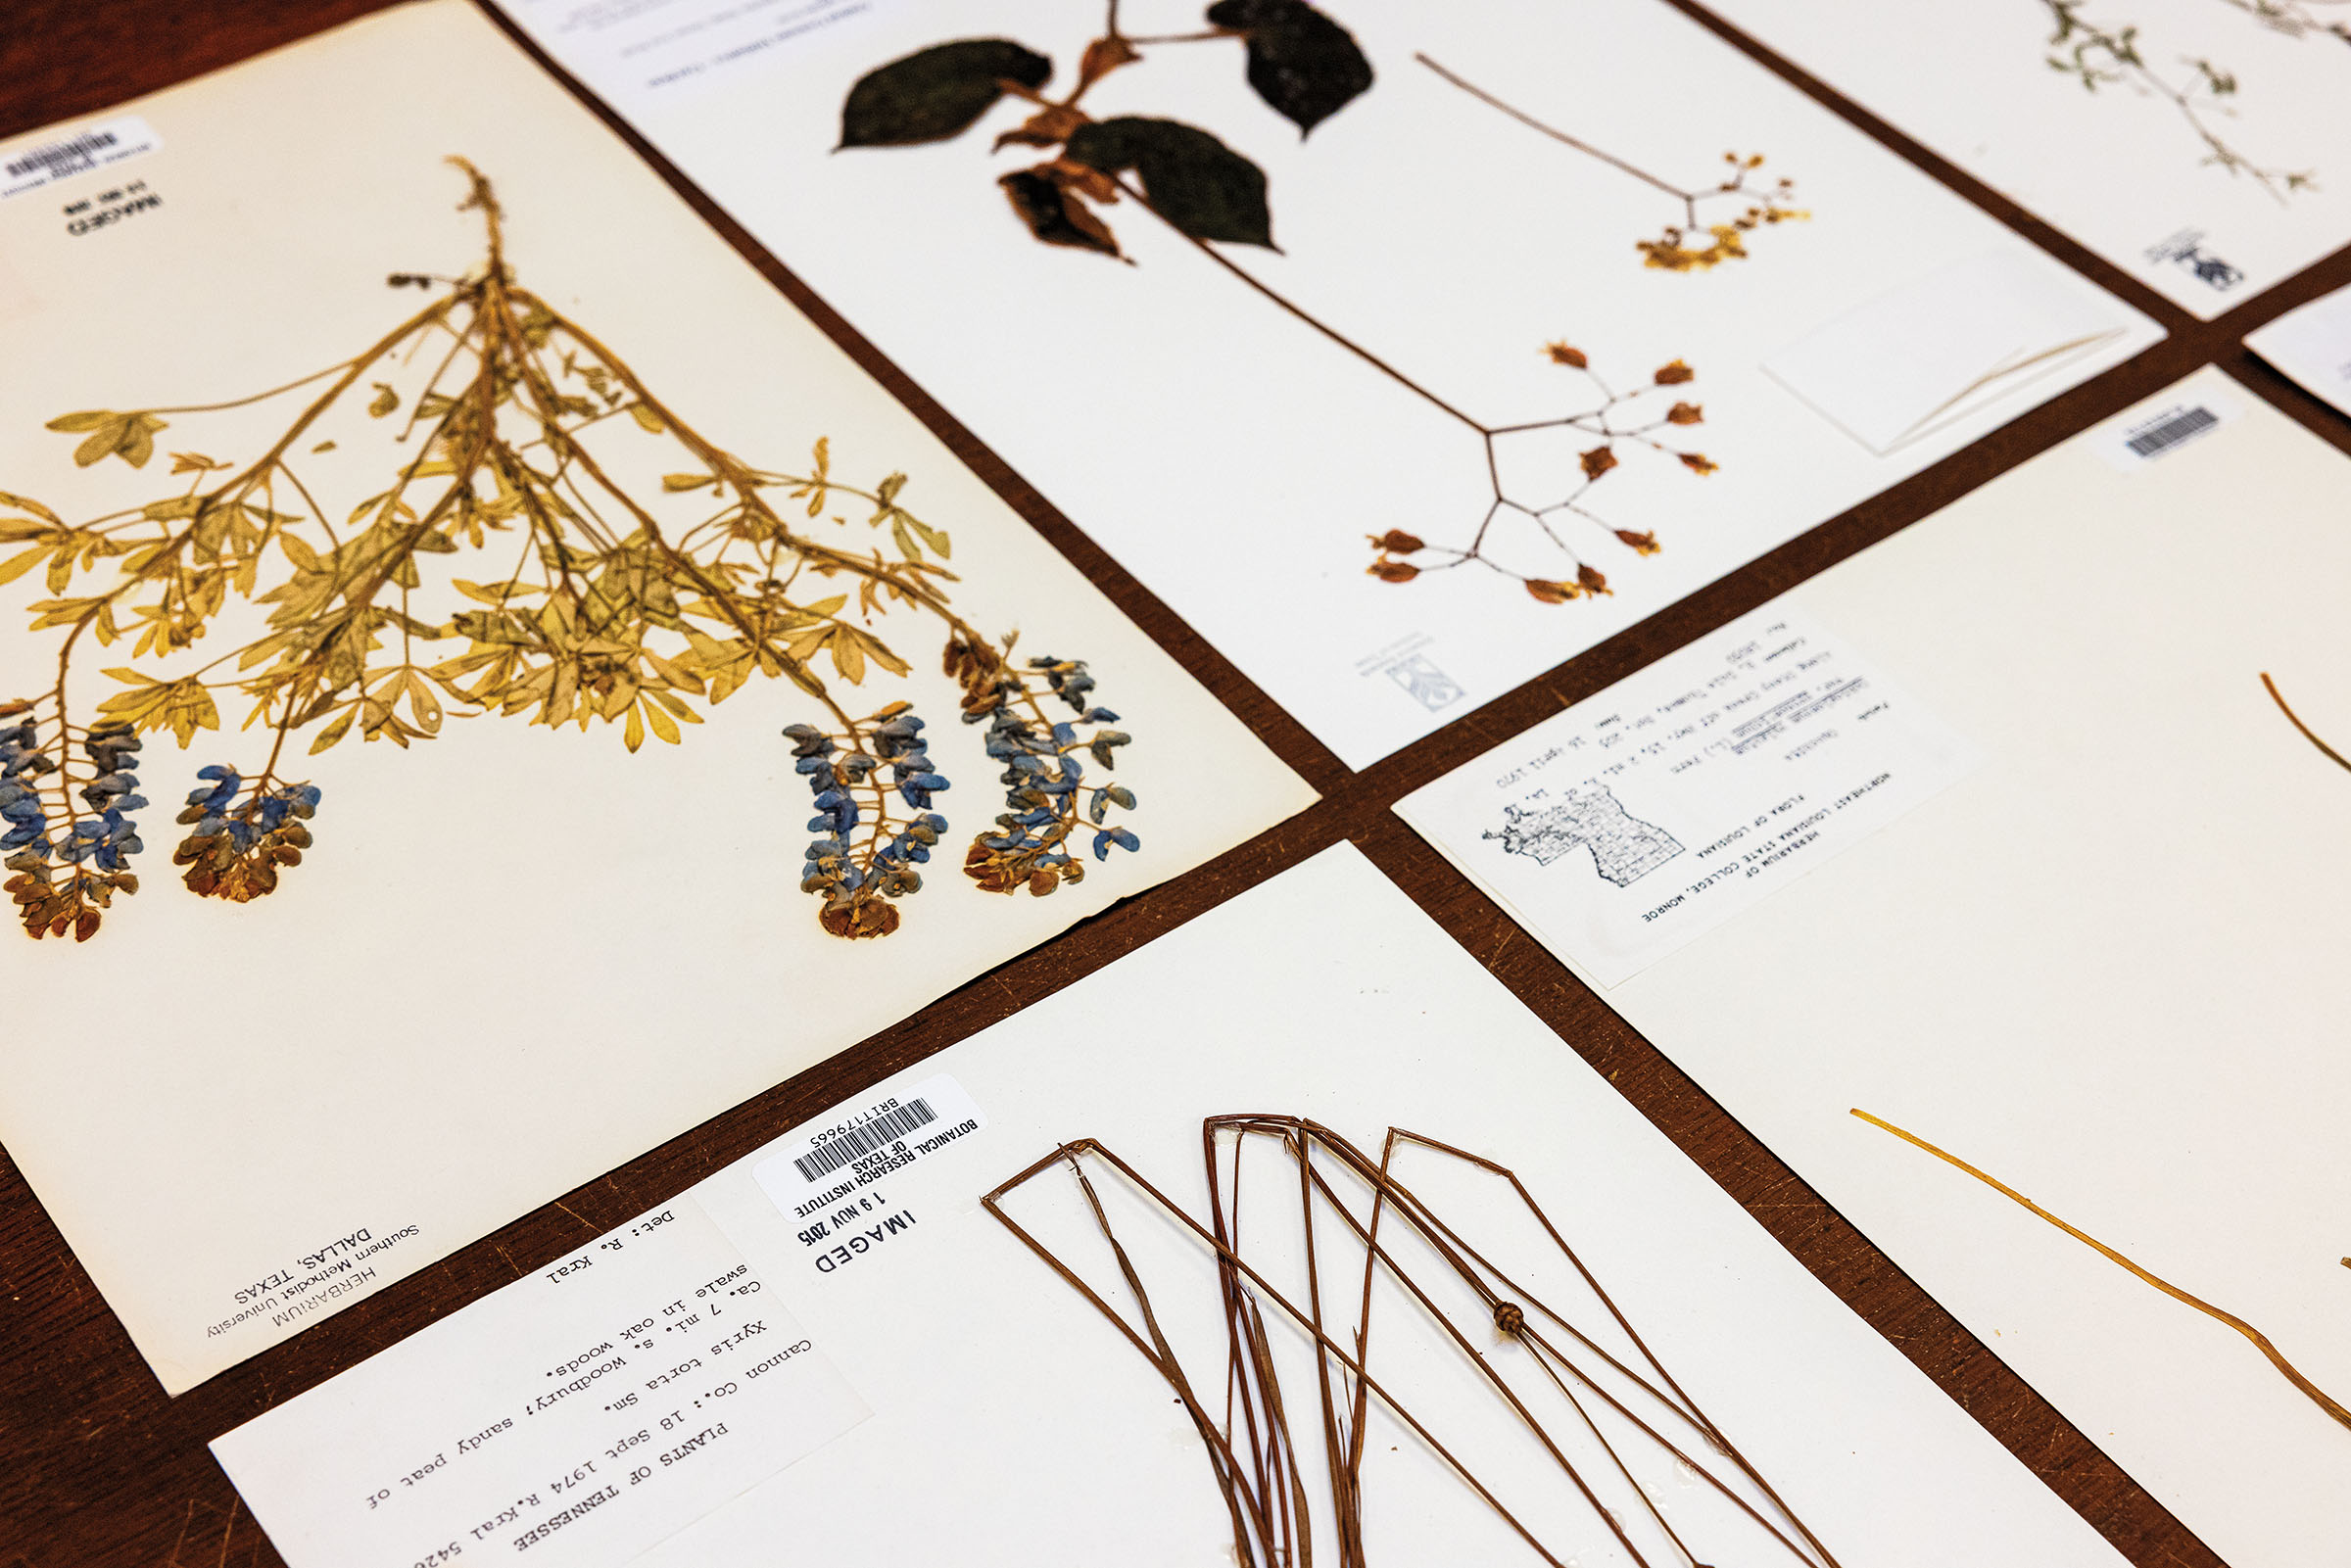 A collection of pressed flowers on white paper laid out on a tbale